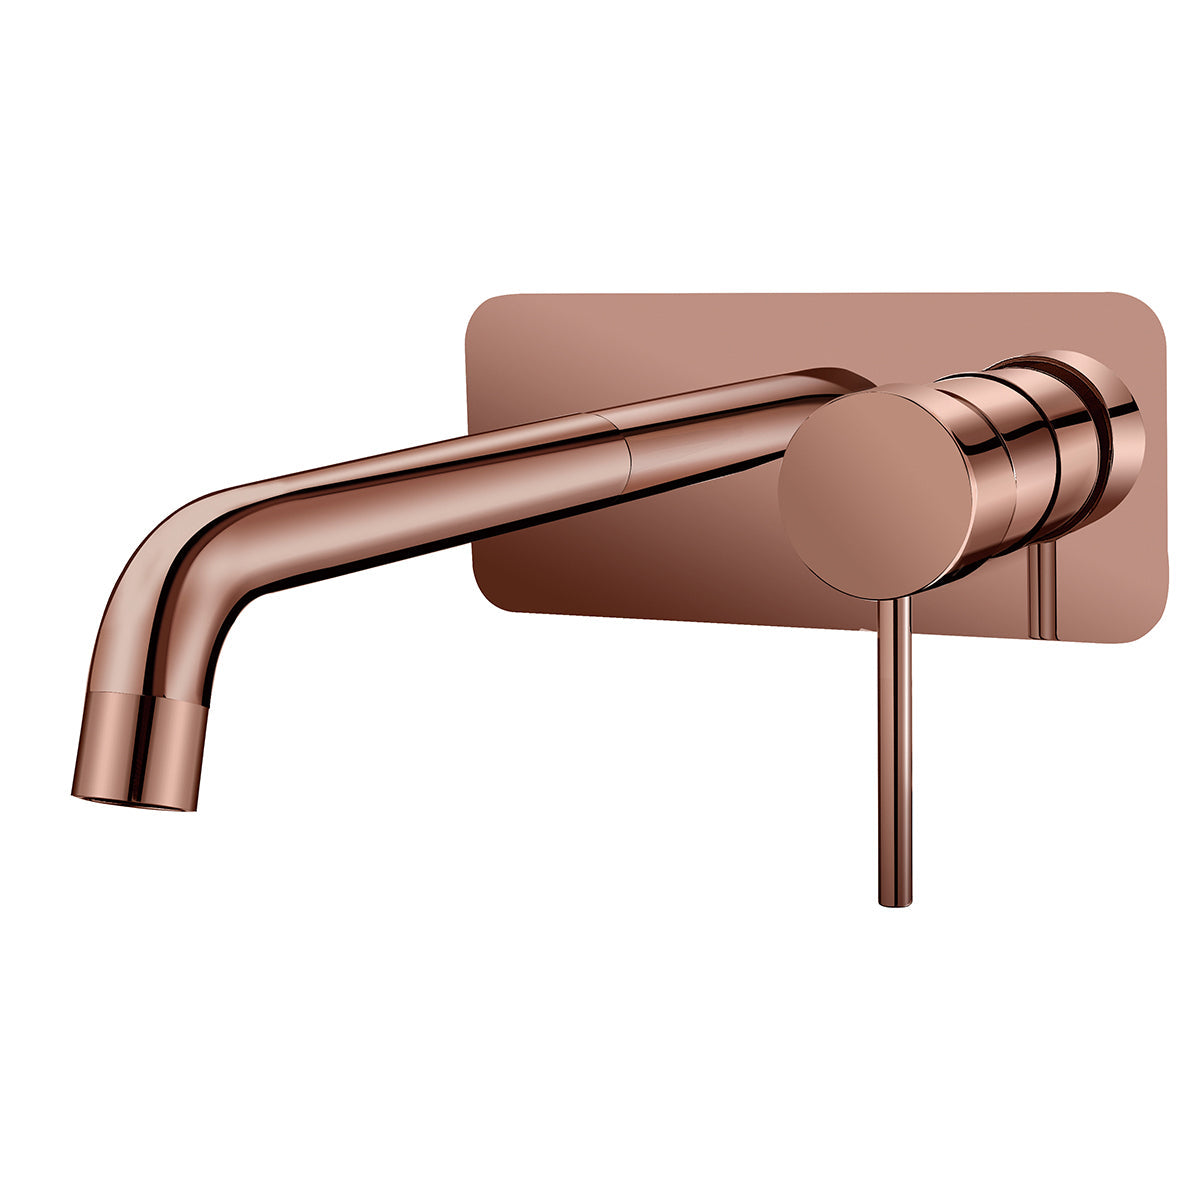 HELLYCAR IDEAL WALL MIXER WITH OUTLET 209MM ROSE GOLD